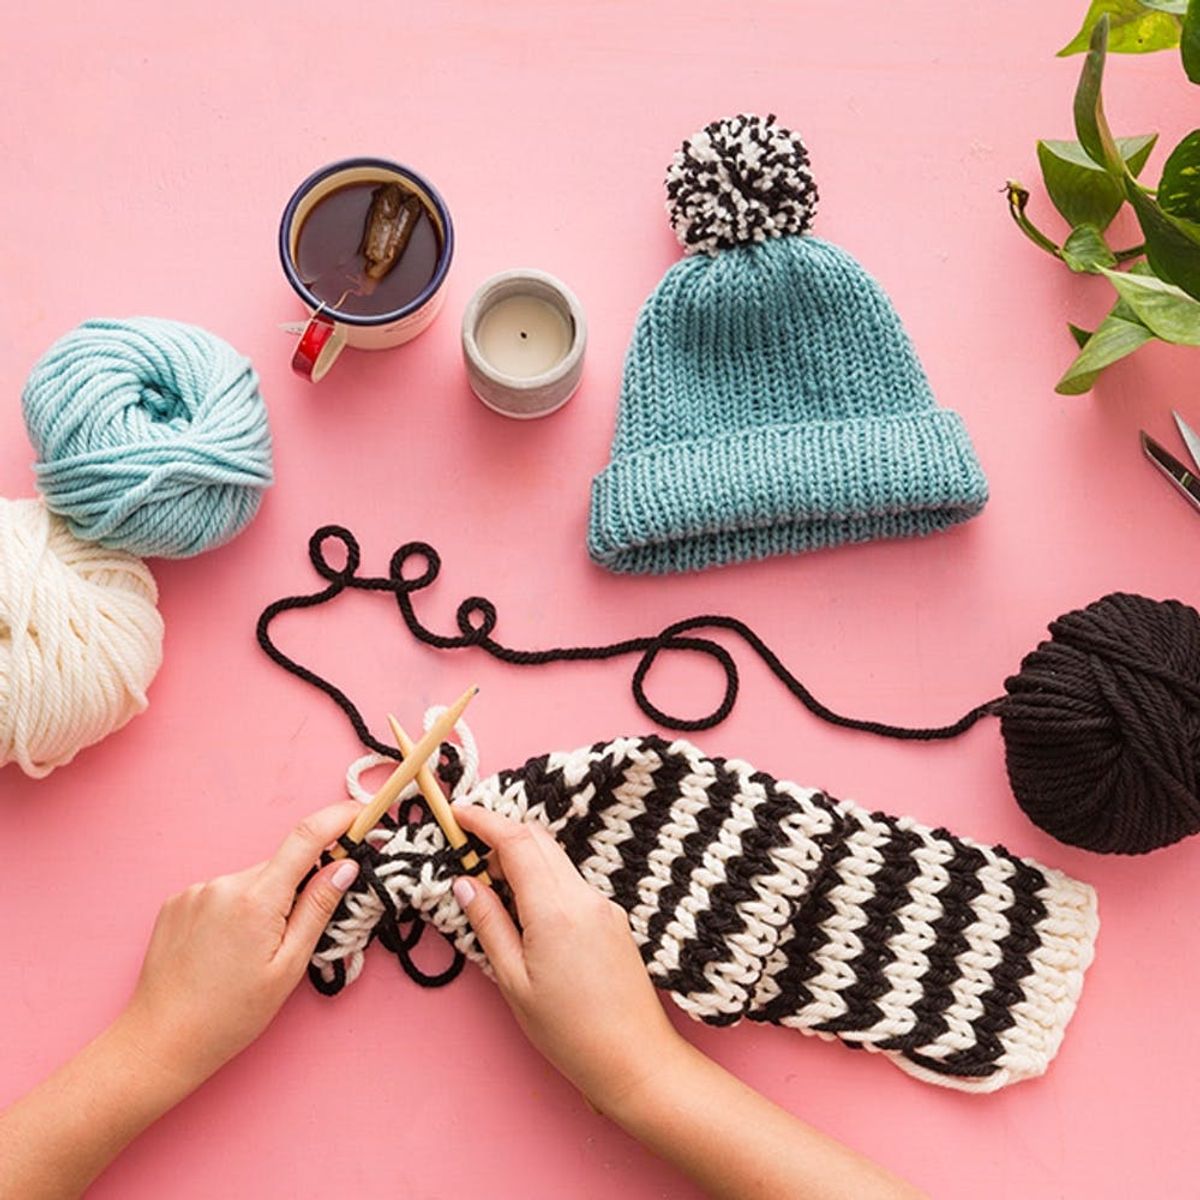 This Kickstarter Will Get You Knitting in an Exciting New Way